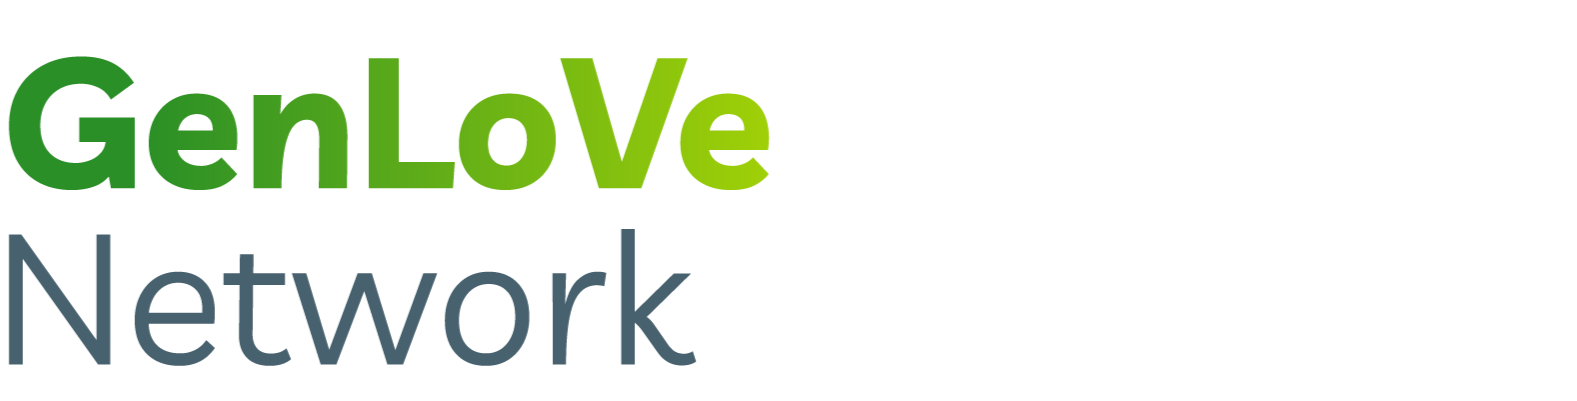 LV Jobs - Careers website - Inclusion and Wellbeing - Networks - Genlove Network Logo.png